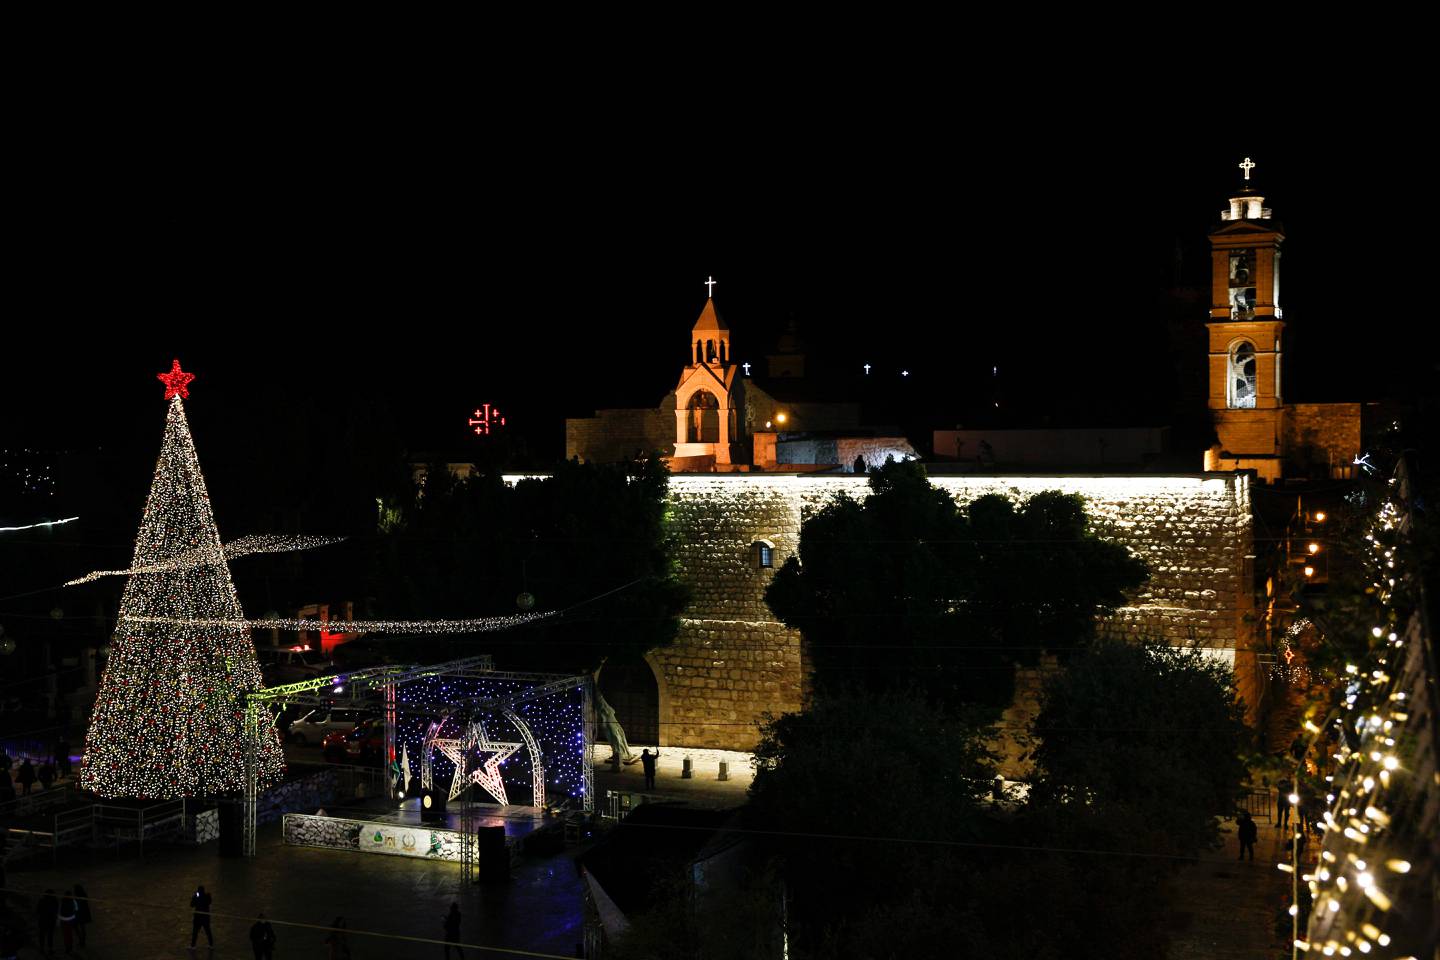 Christmas tree is lit outside the Church of the Nativity, traditionally believed by Christians to be the birthplace of Jesus Christ in the West Bank city of Bethlehem, Saturday, Dec. 5, 2020. (AP Photo/Majdi Mohammed)